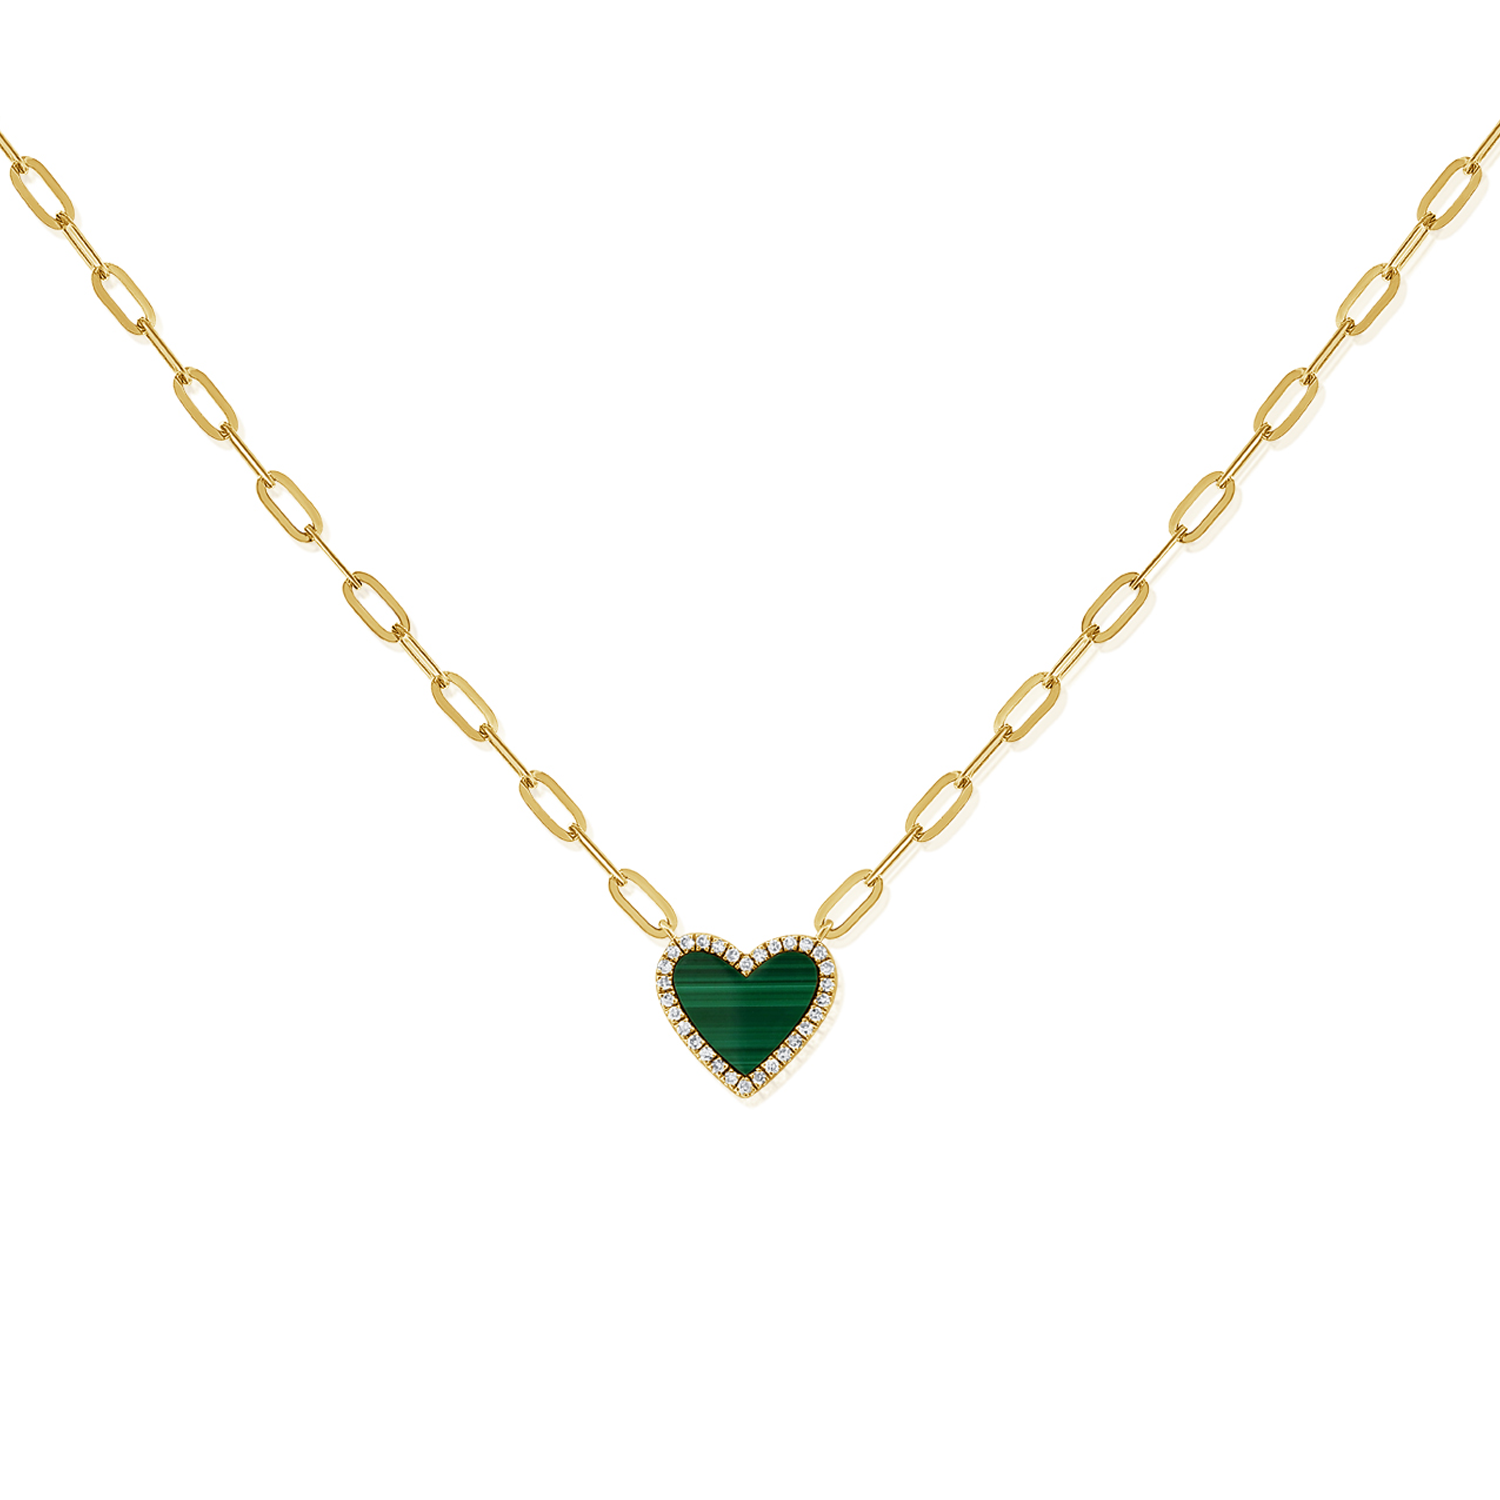 Oval Chain Link Necklace with Malachite & Diamond Heart